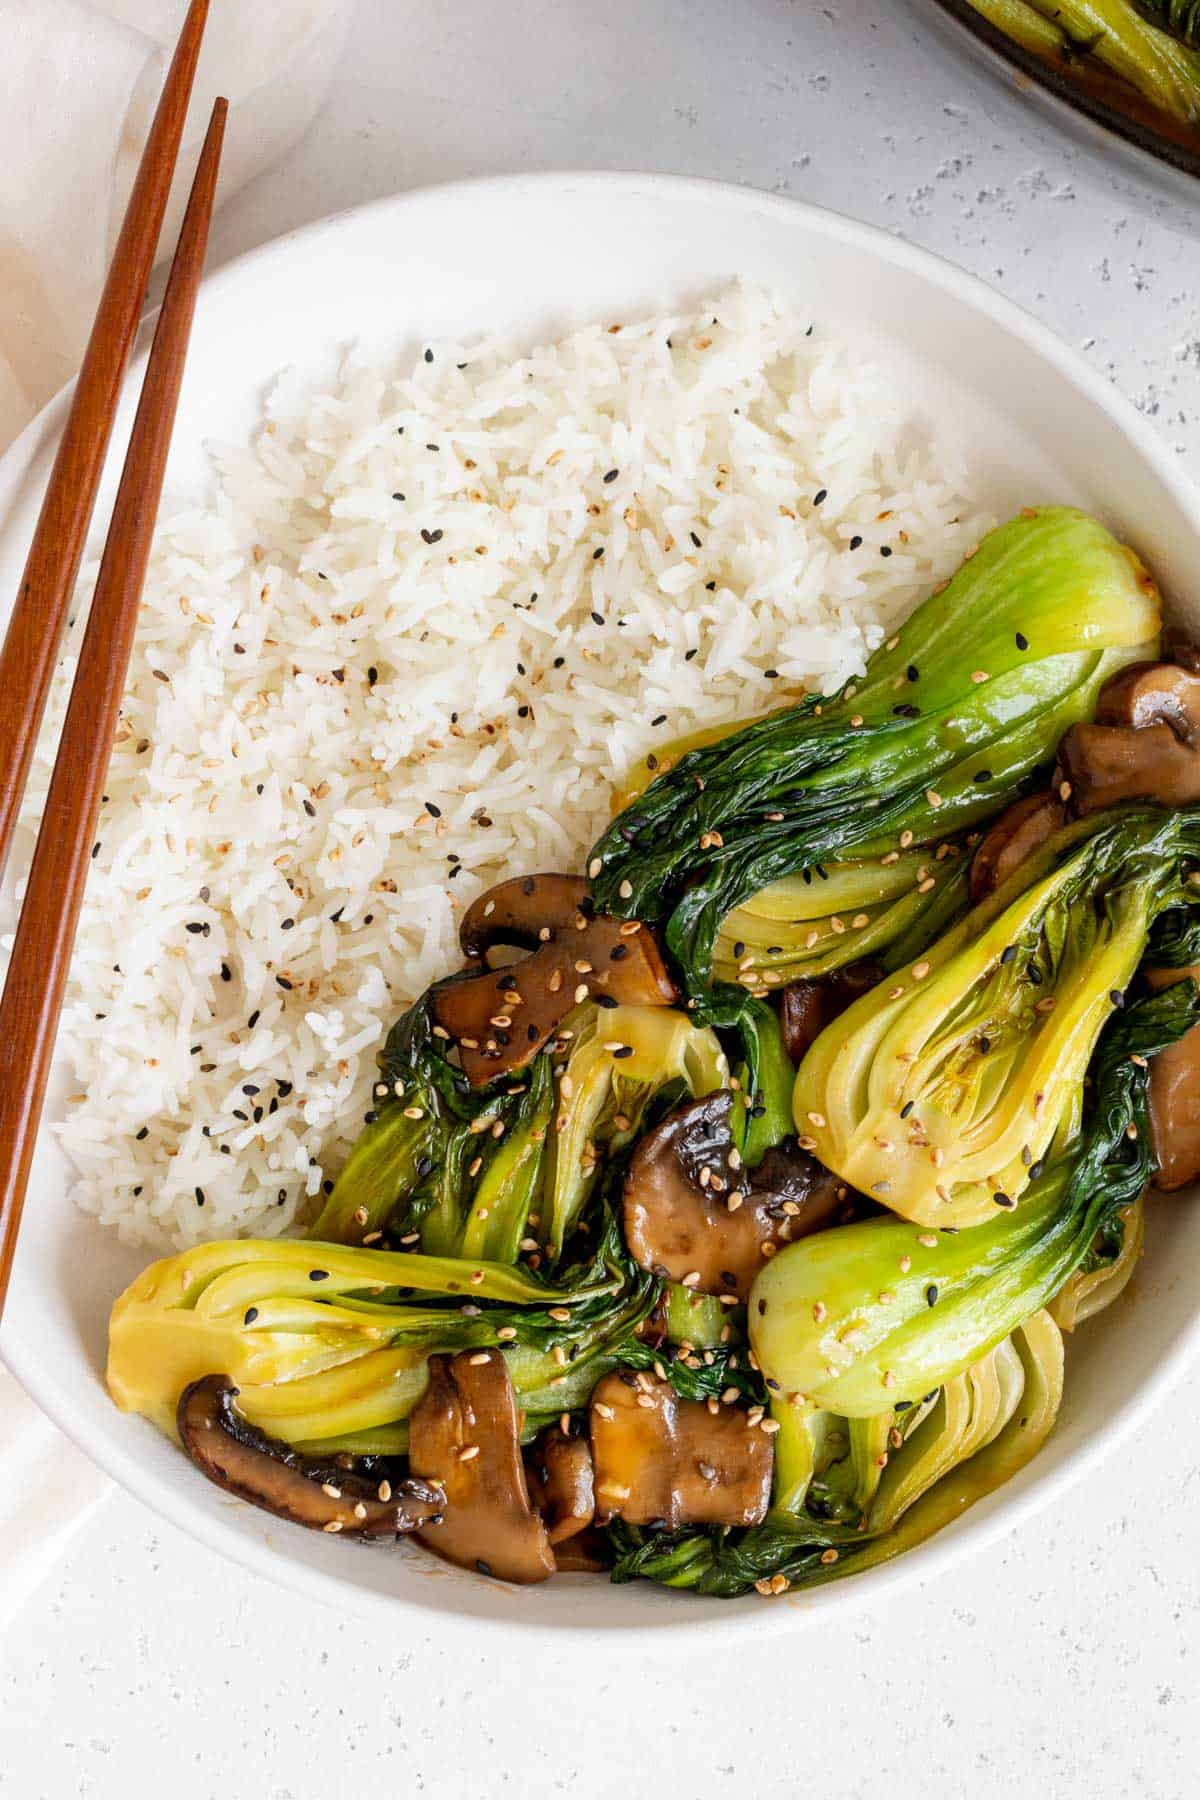 Close up view of a plate with bok choy stir fry over white rice.